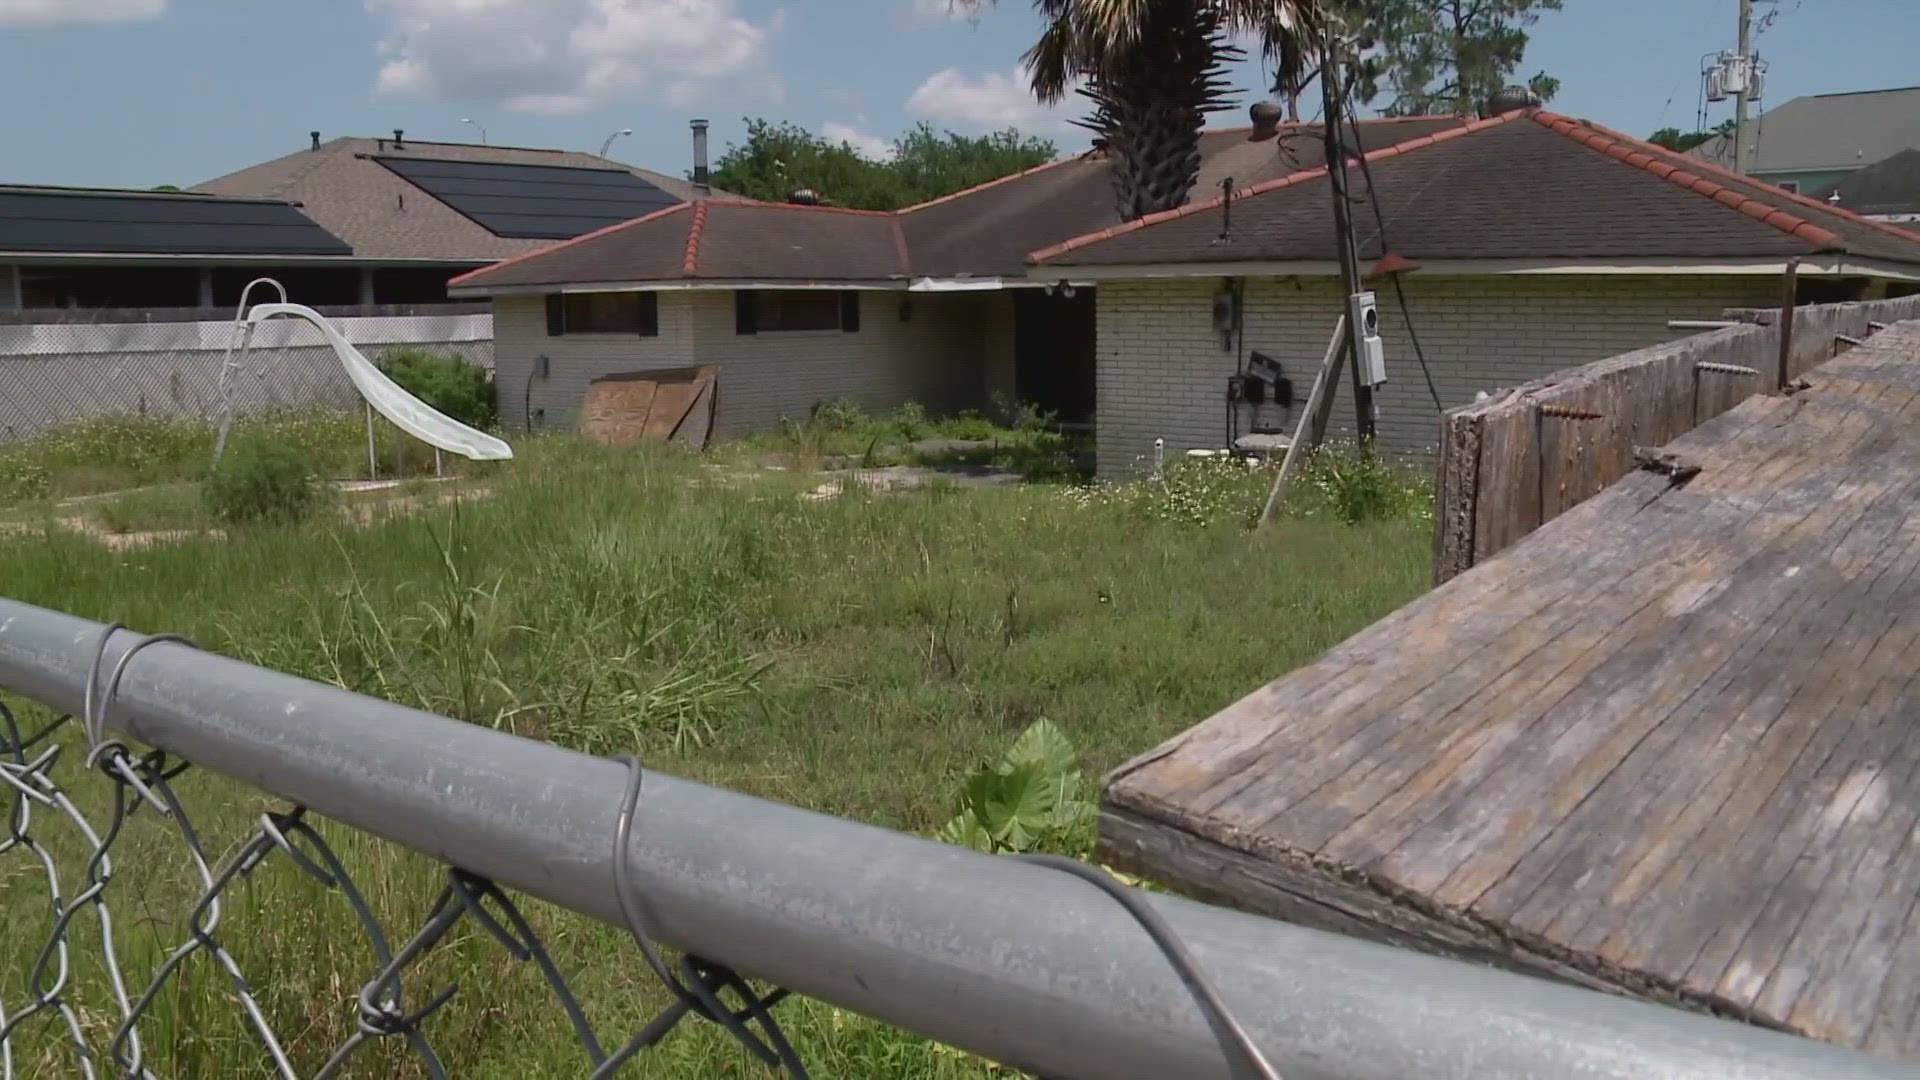 A Lakeview neighborhood says they've been pushing the City of New Orleans to do something about an abandoned home for 16 years.